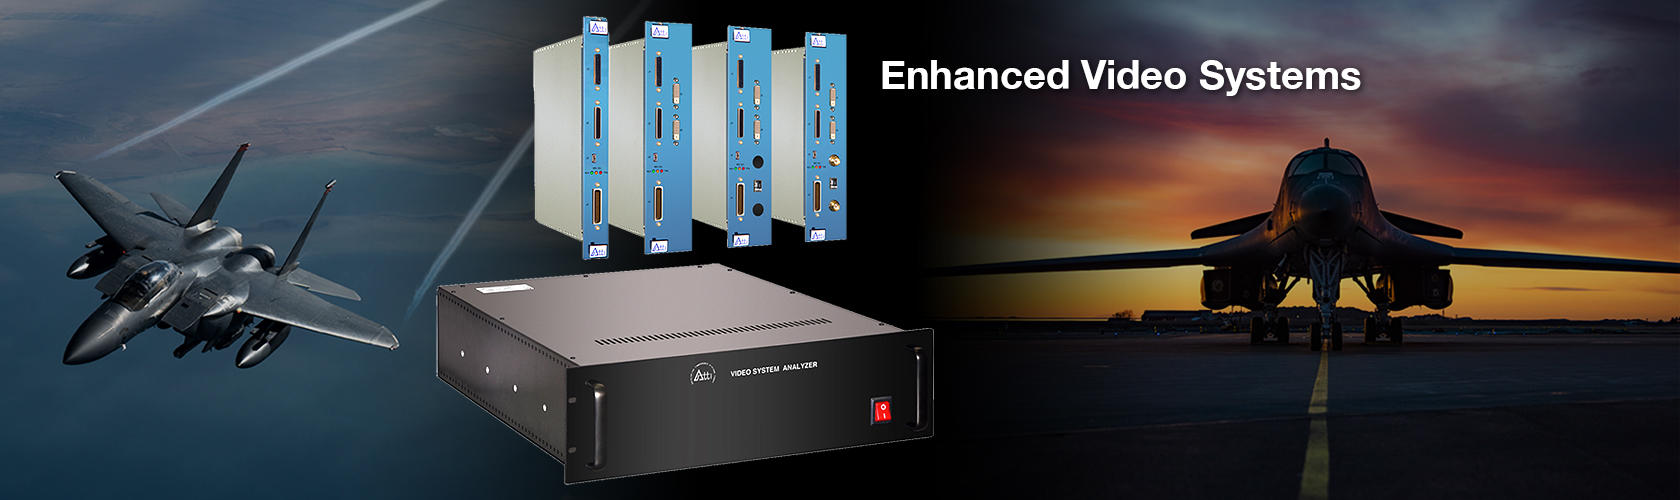 Enhanced Video Systems